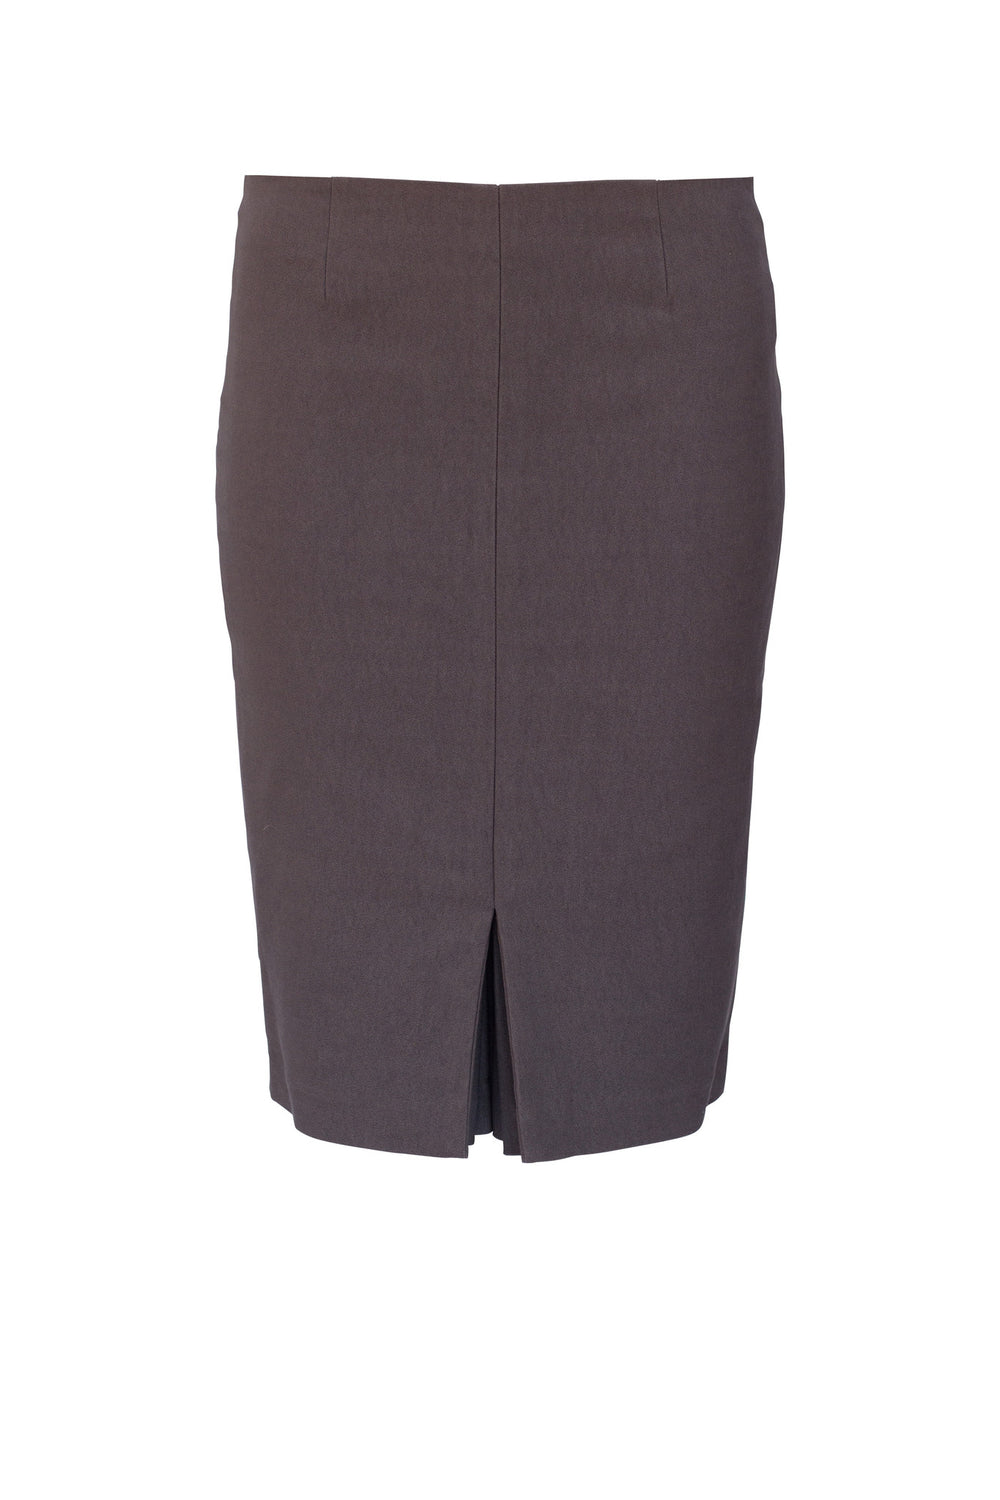 grey skirt in stretch faille with kick pleat in centre for office 